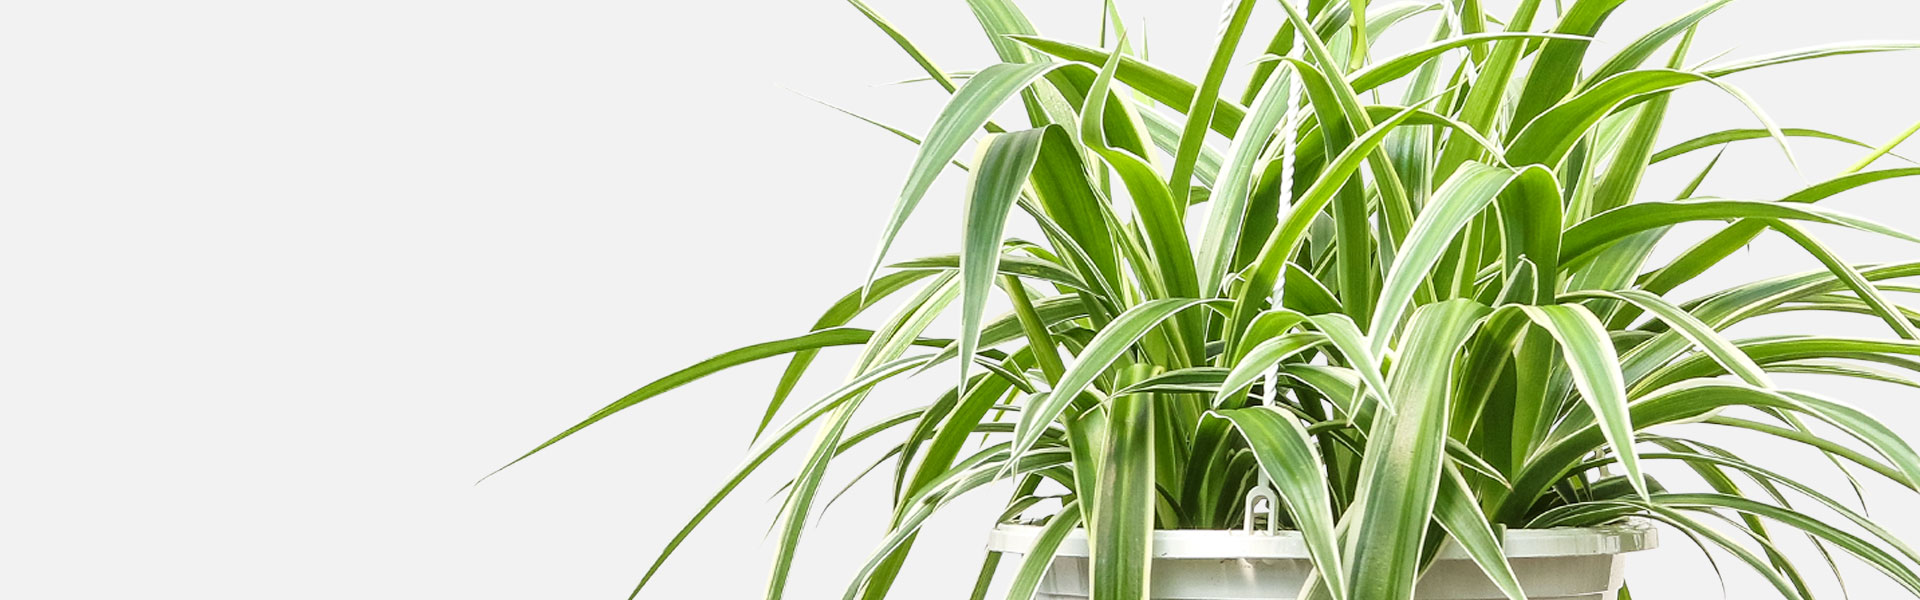 Hang in There! Our Top Picks for Hanging Plants